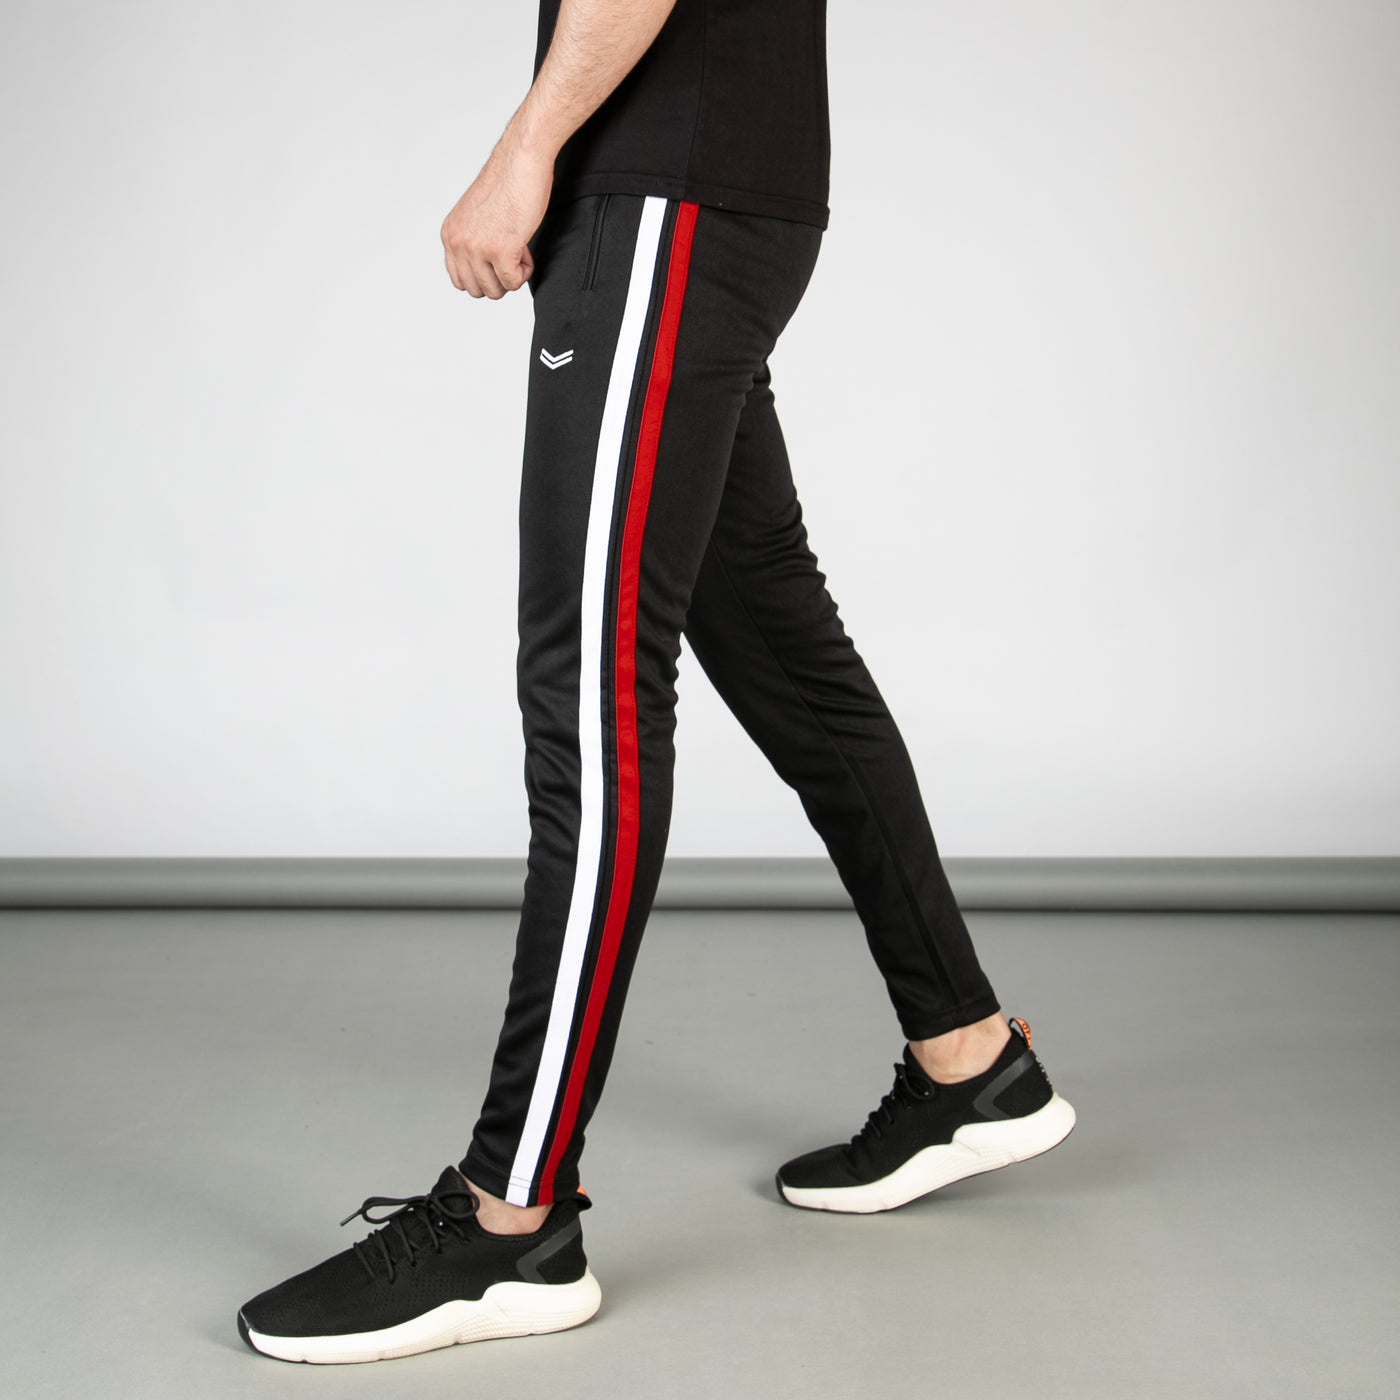 Black Quick Dry Bottoms with White & Red Stripes